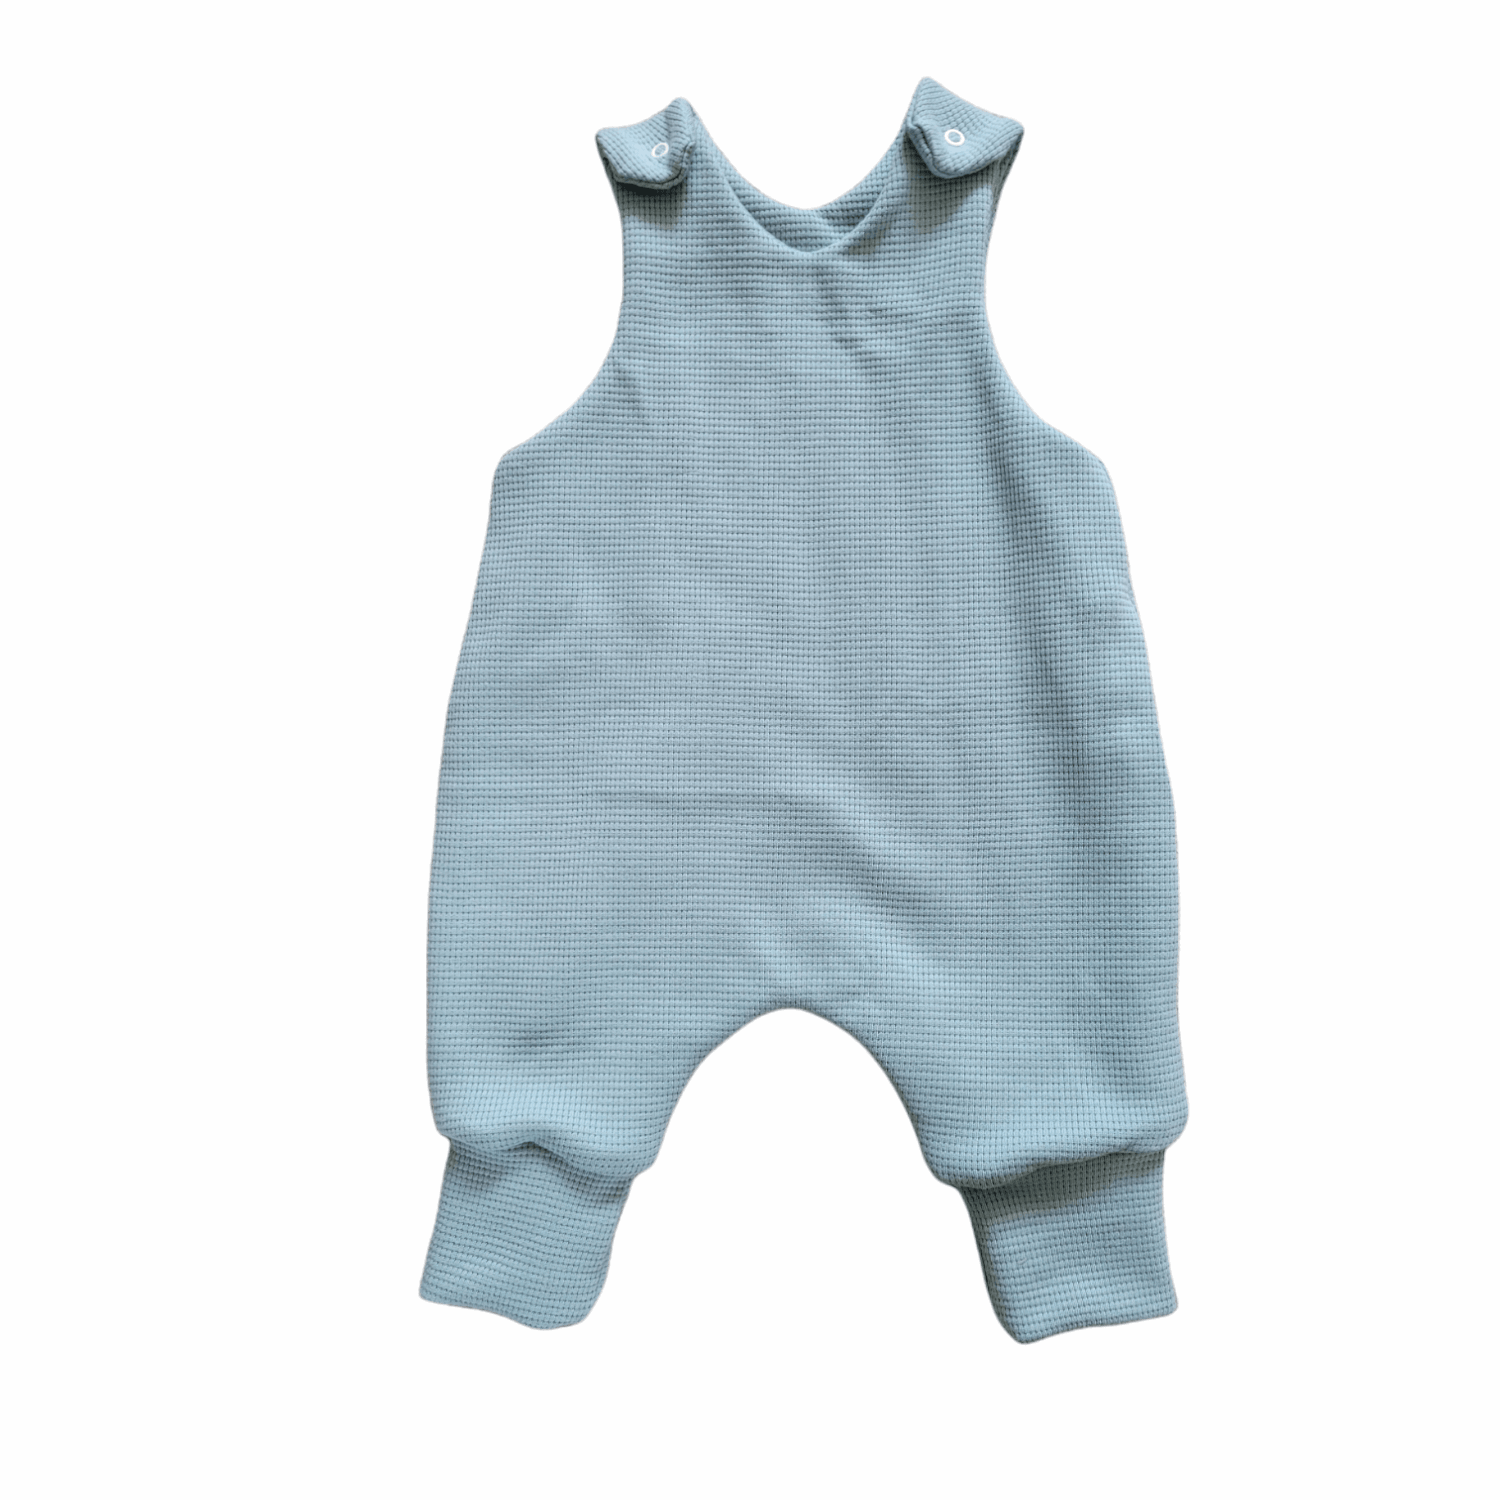 Waffle knit Handmade Romper - Multiple colour options - Moose and Goose Gifts